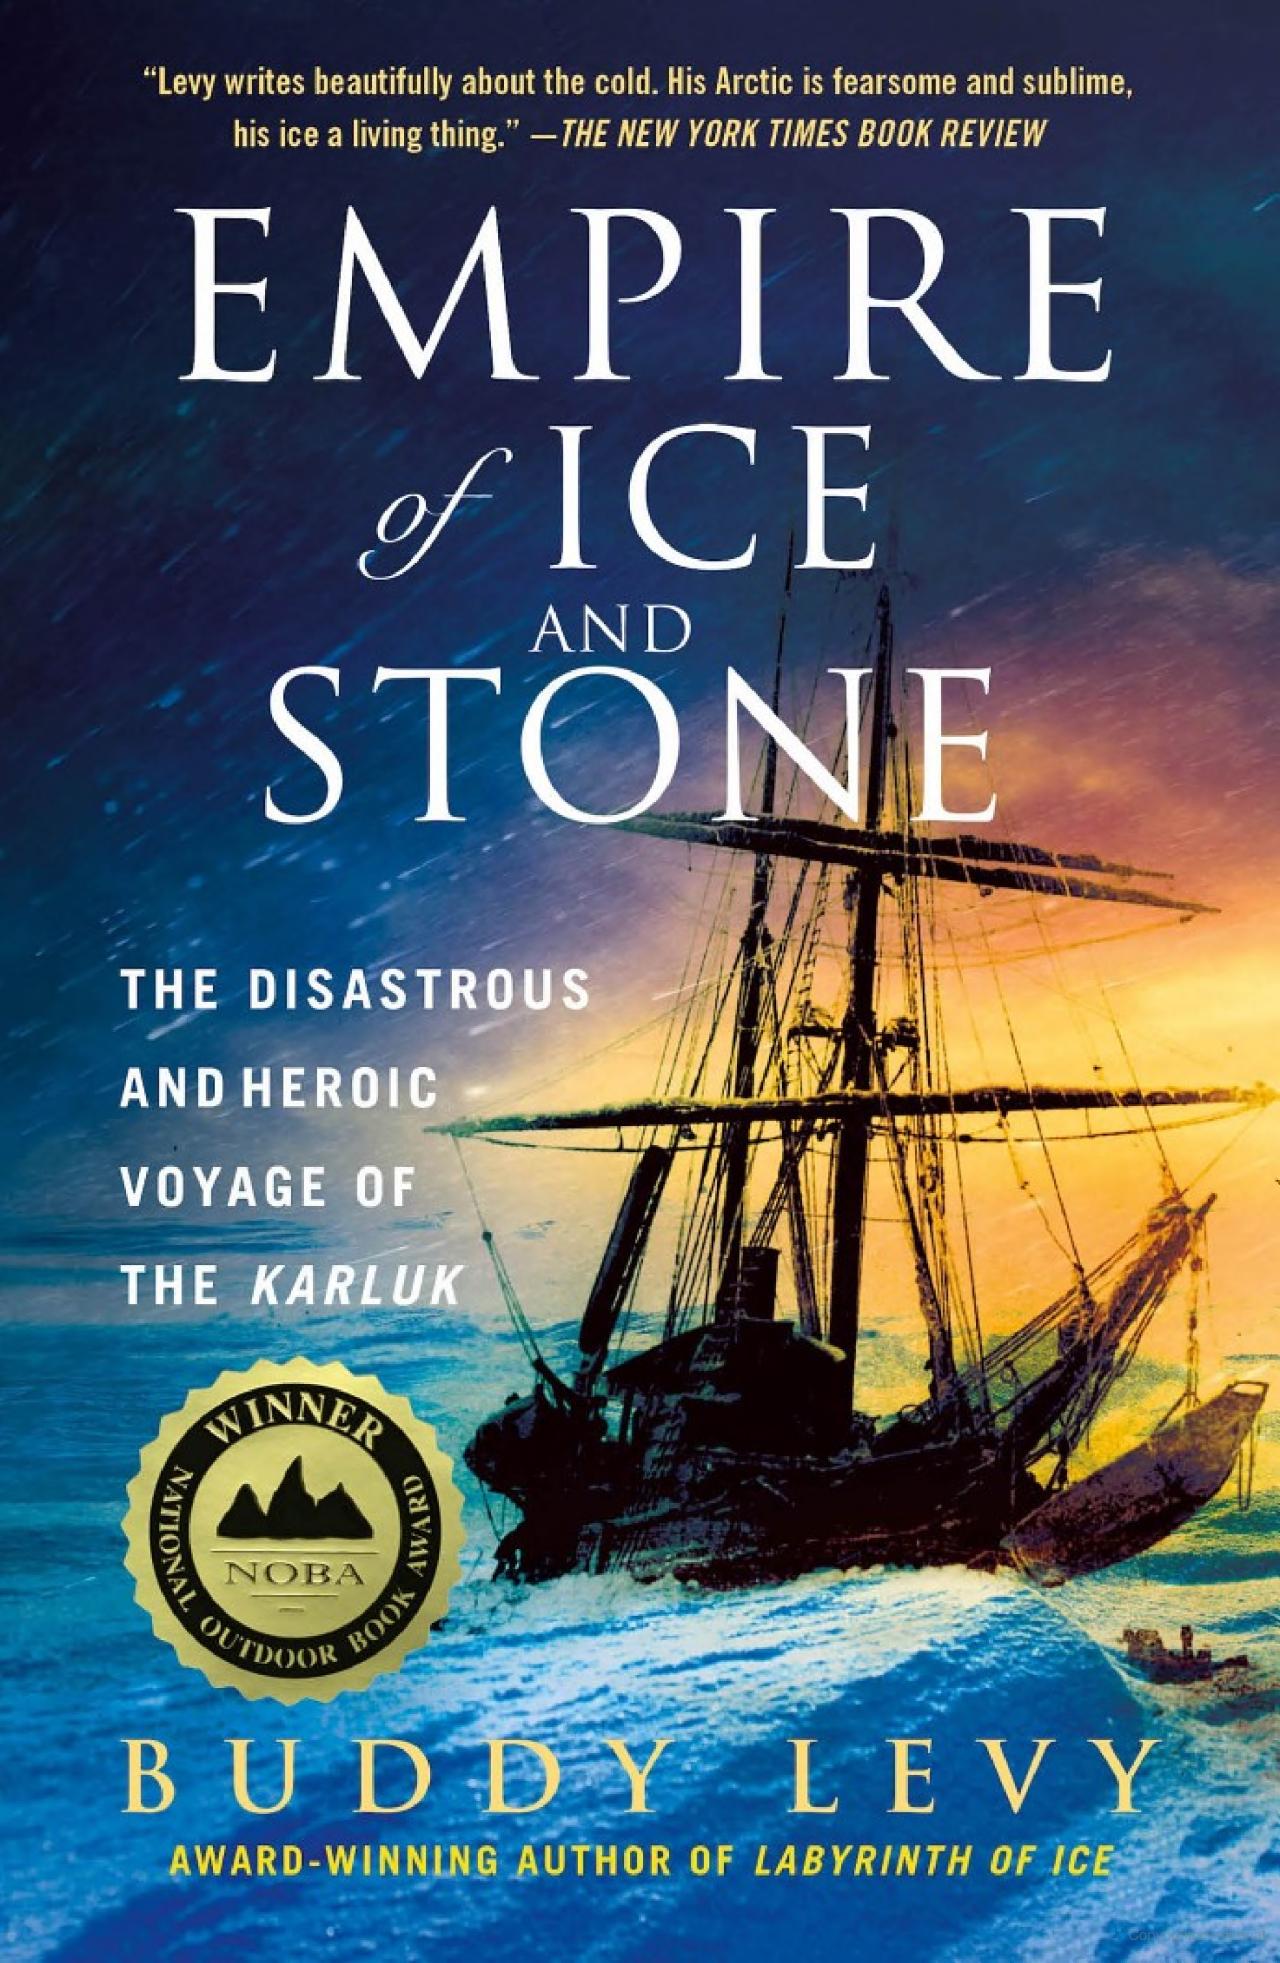 Image of the book cover featuring a painted picture of a boat on rough water.